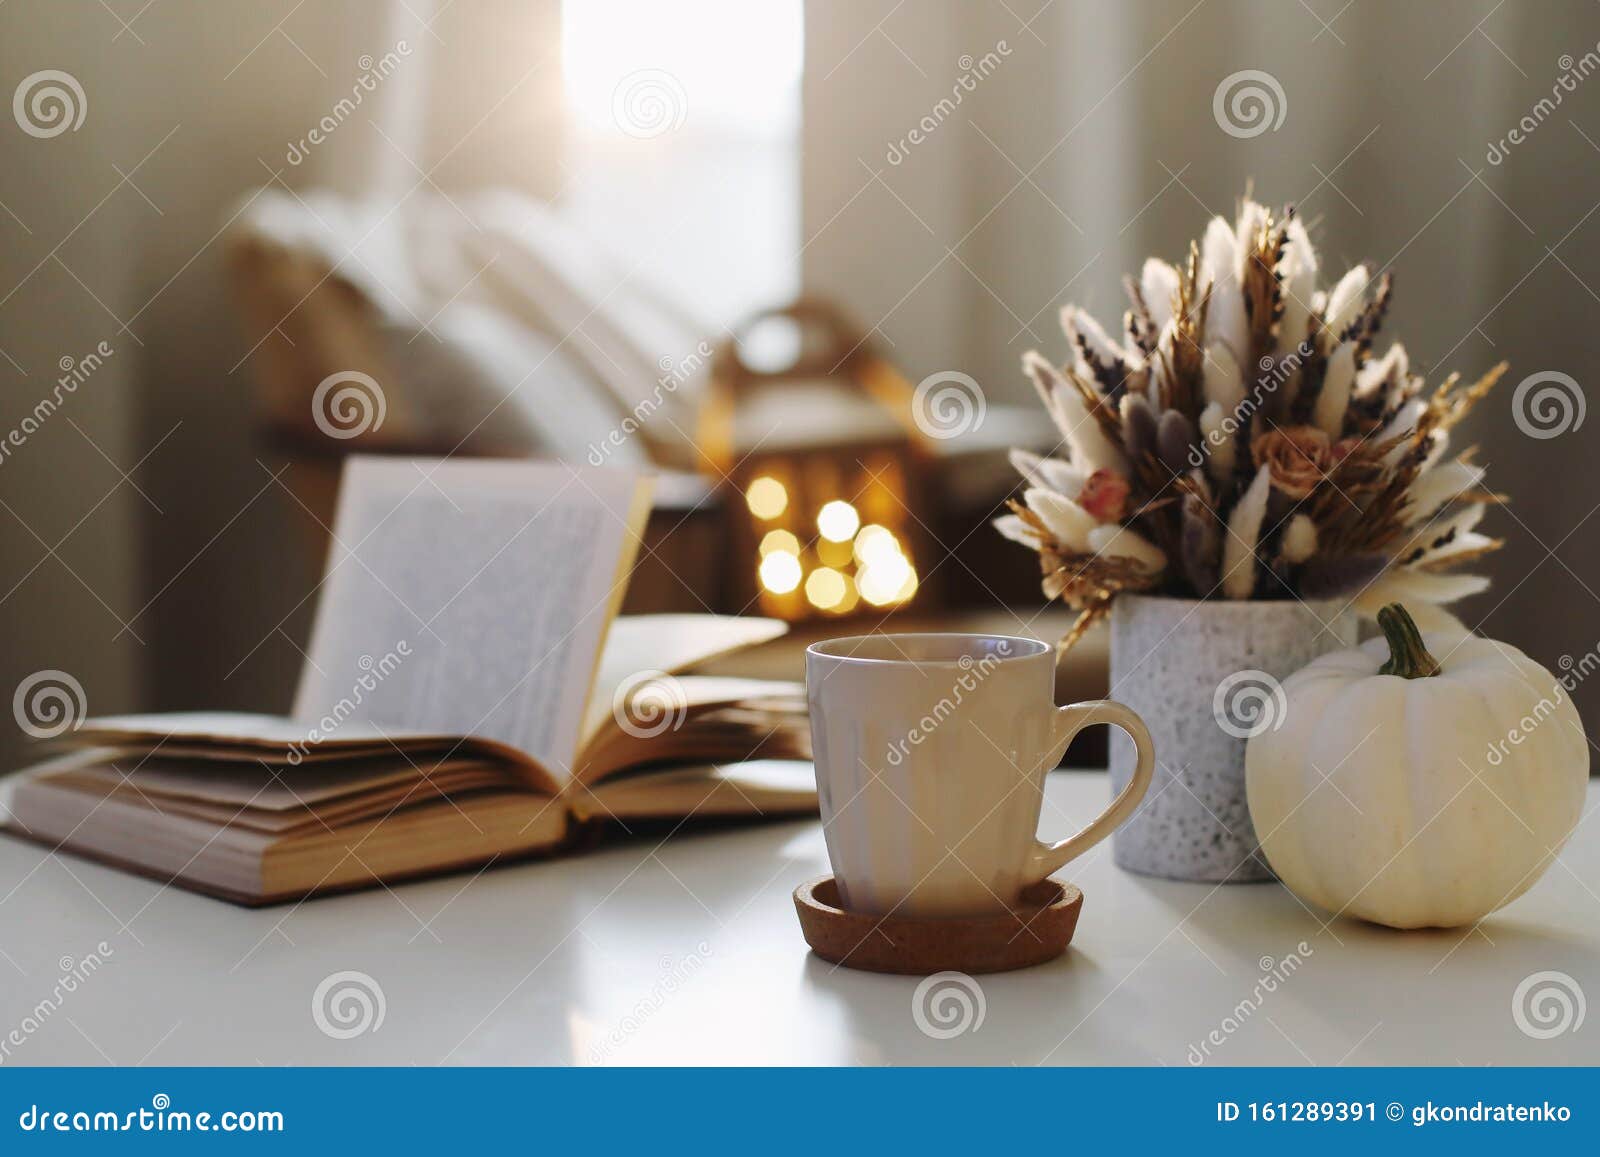 autumn still life. coffee cup, flowers, book and pumpkin. hygge lifestyle, cozy autumn mood. flat lay, happy thanksgiving